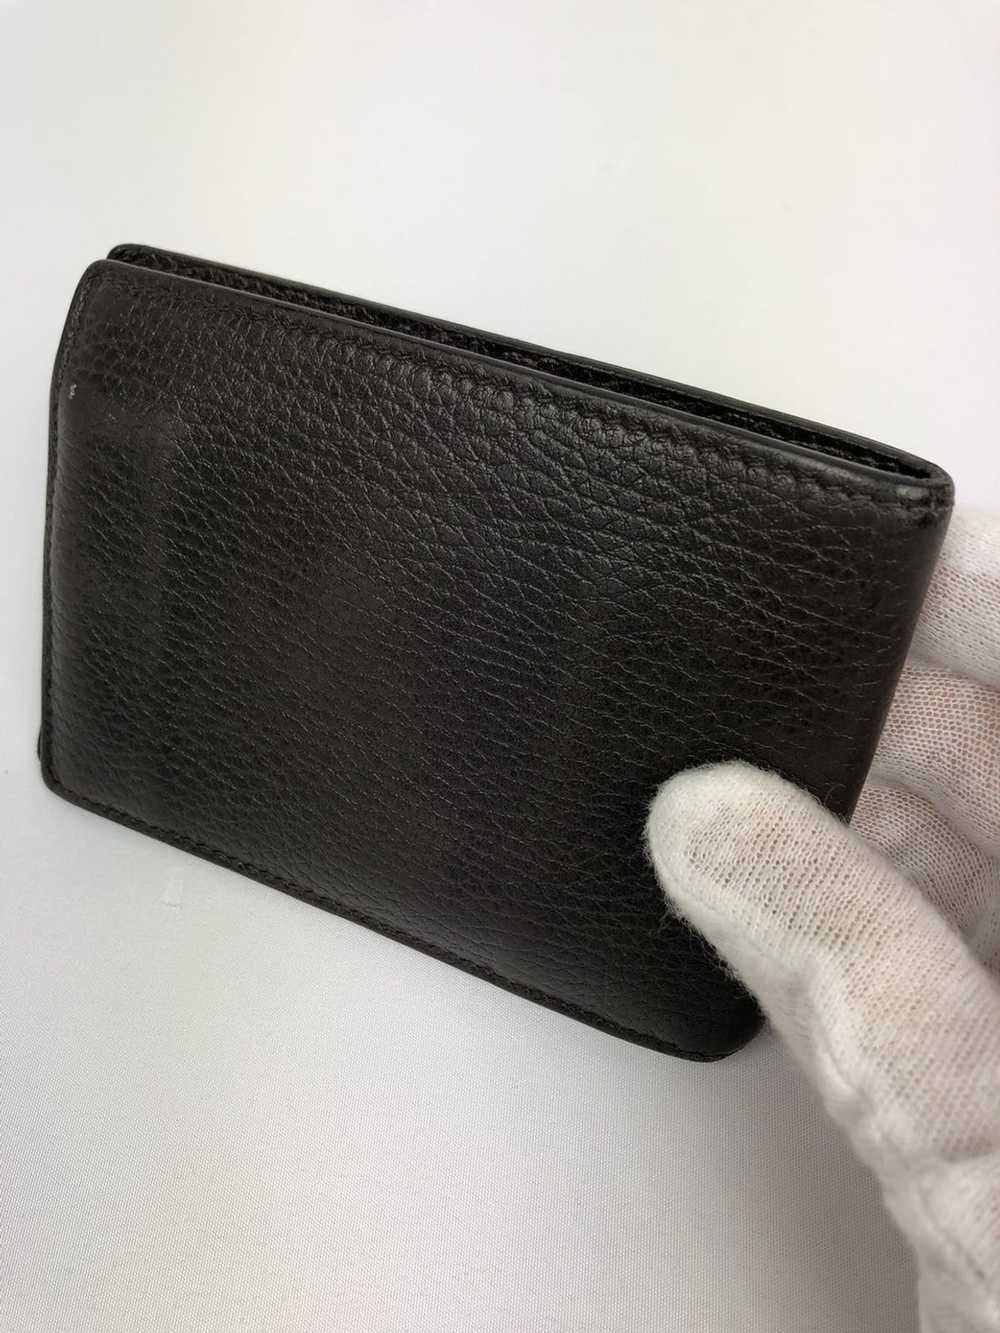 Gucci Gucci brown leather bifold wallet - image 3